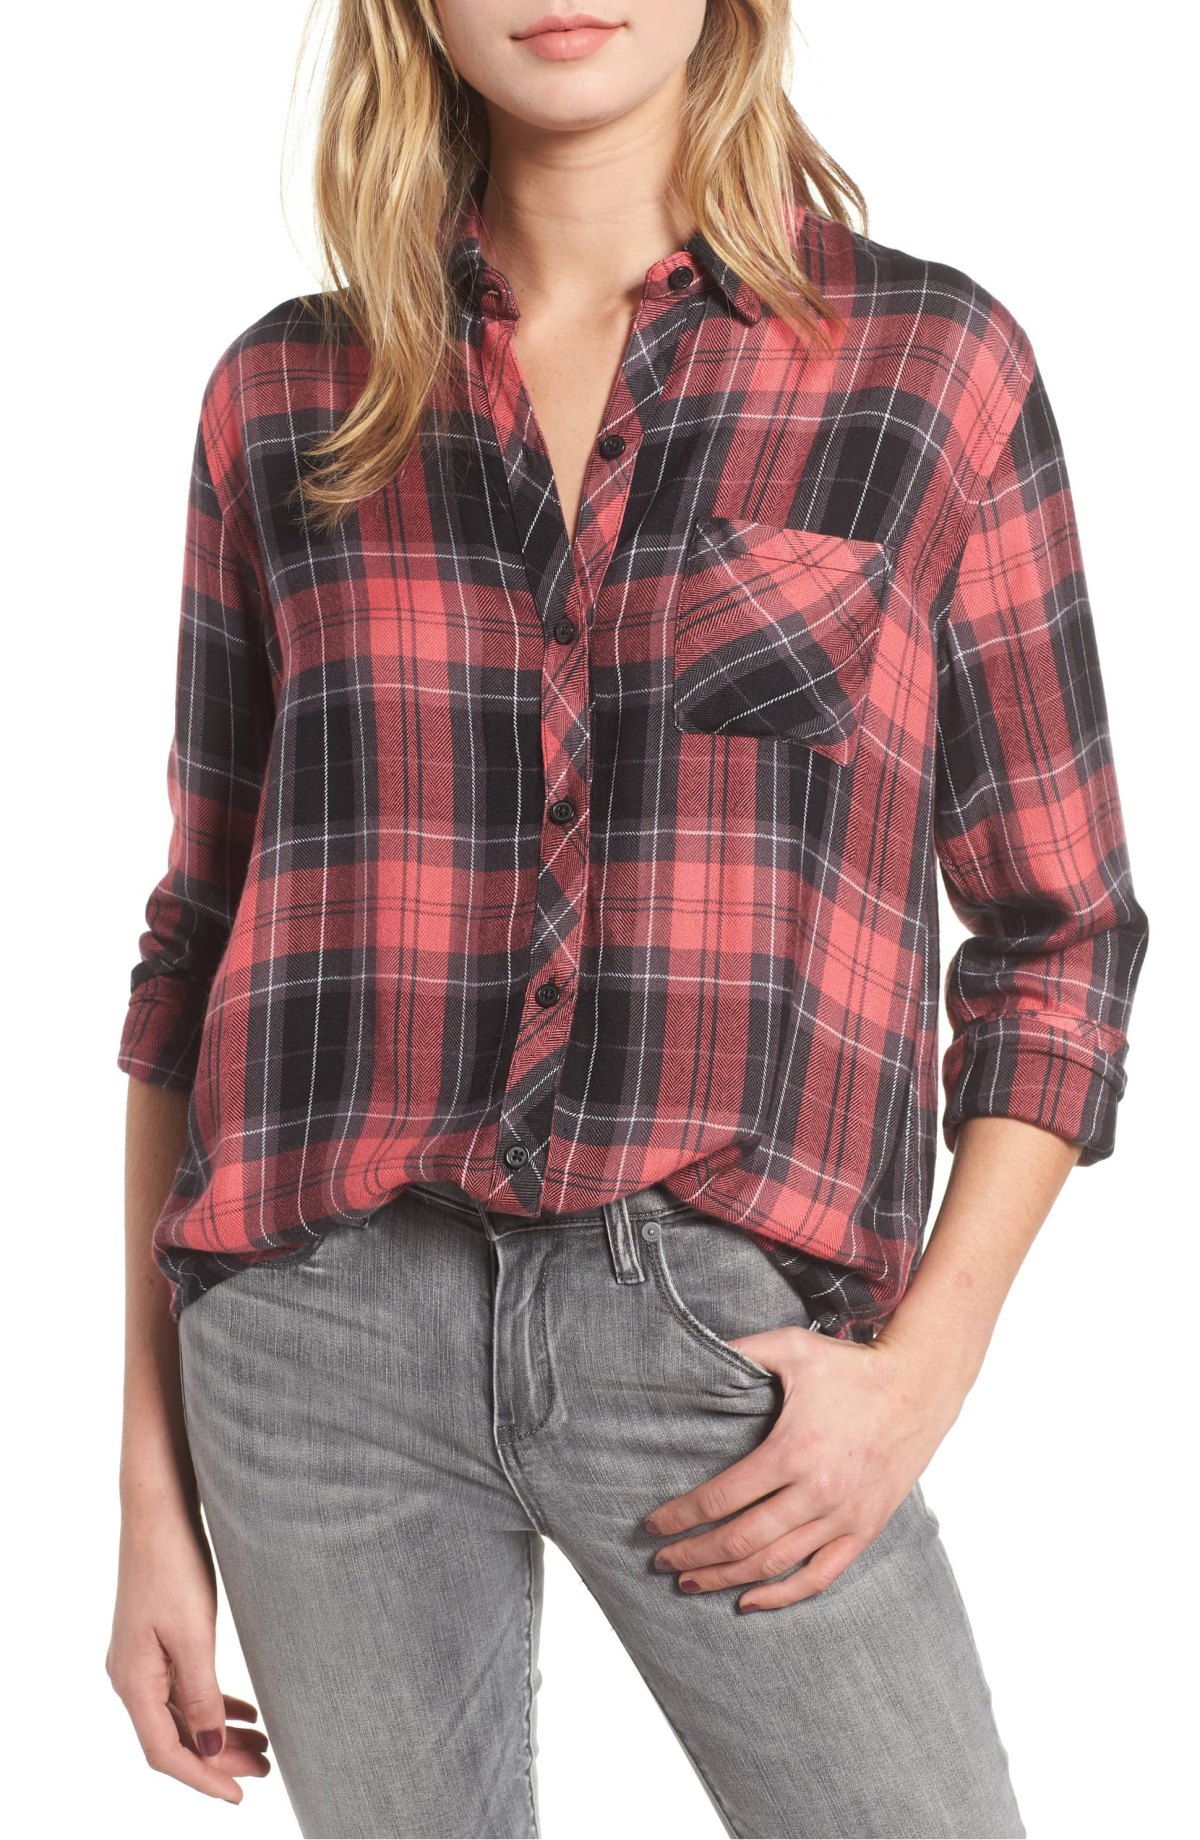 These Plaid Shirts With Countless Reviews Are Timeless Essentials